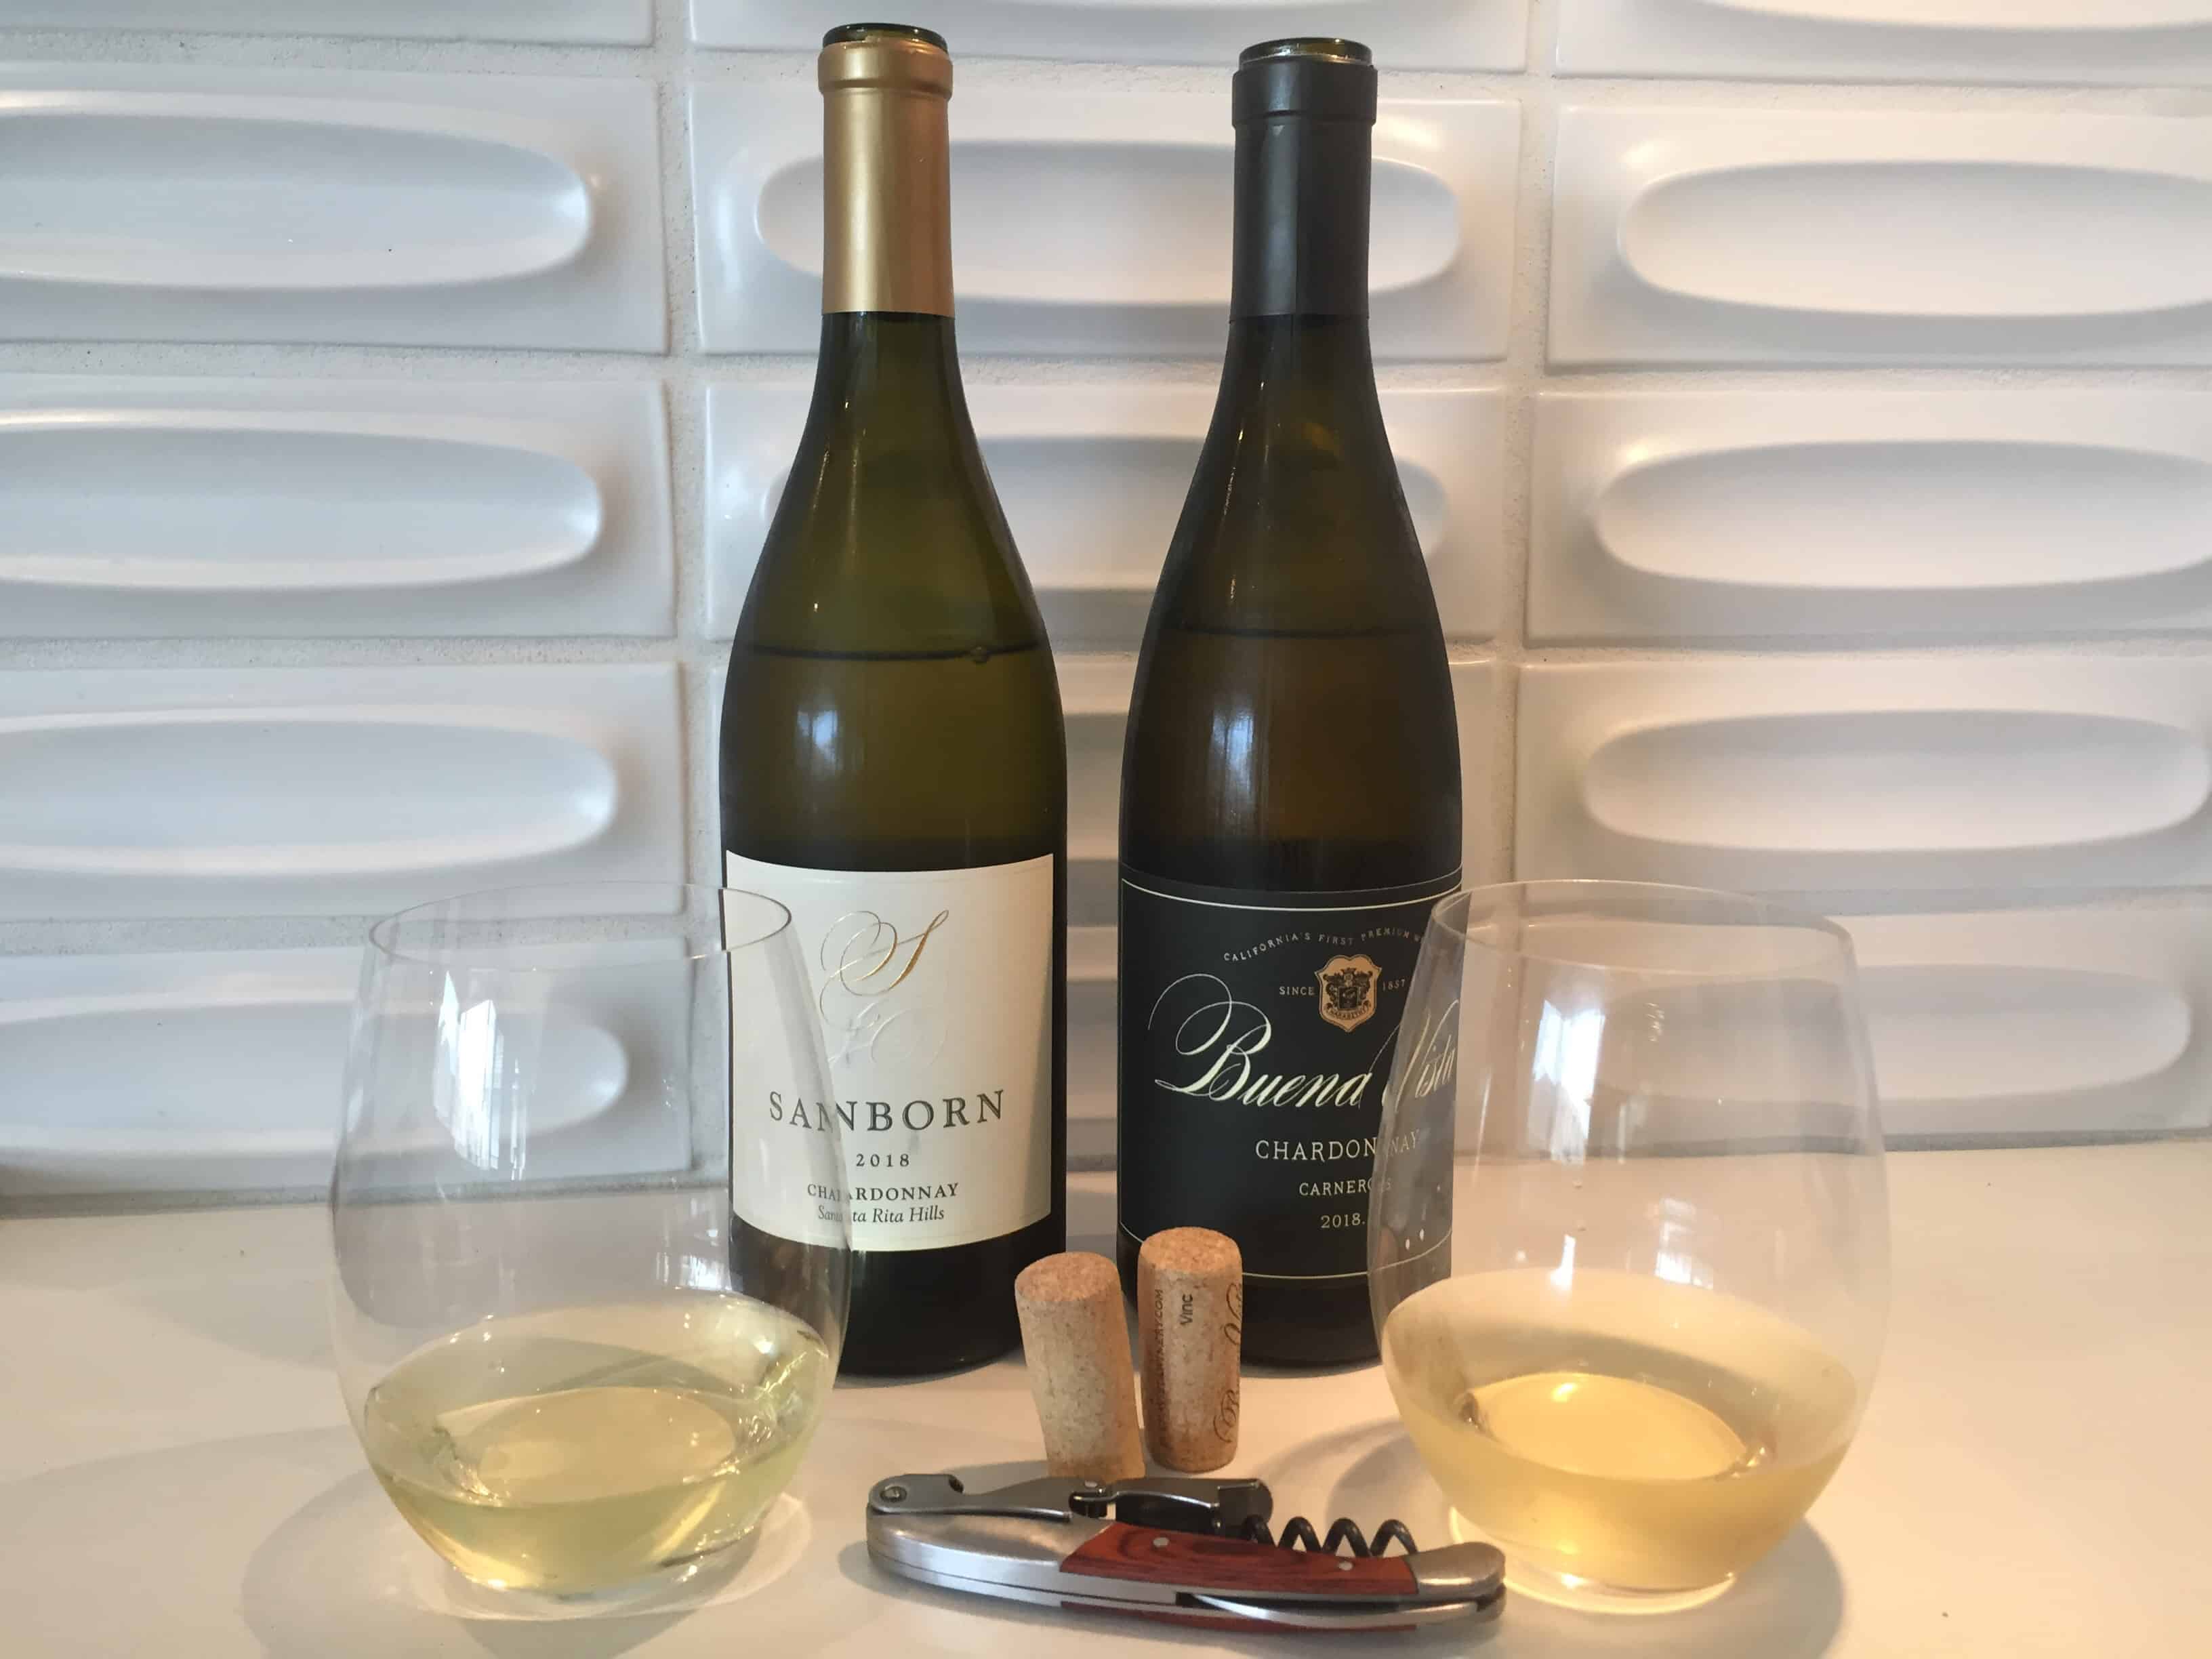 Bottles and glasses of Sanborn and Buena Vista Chardonnays from Traders Joe's